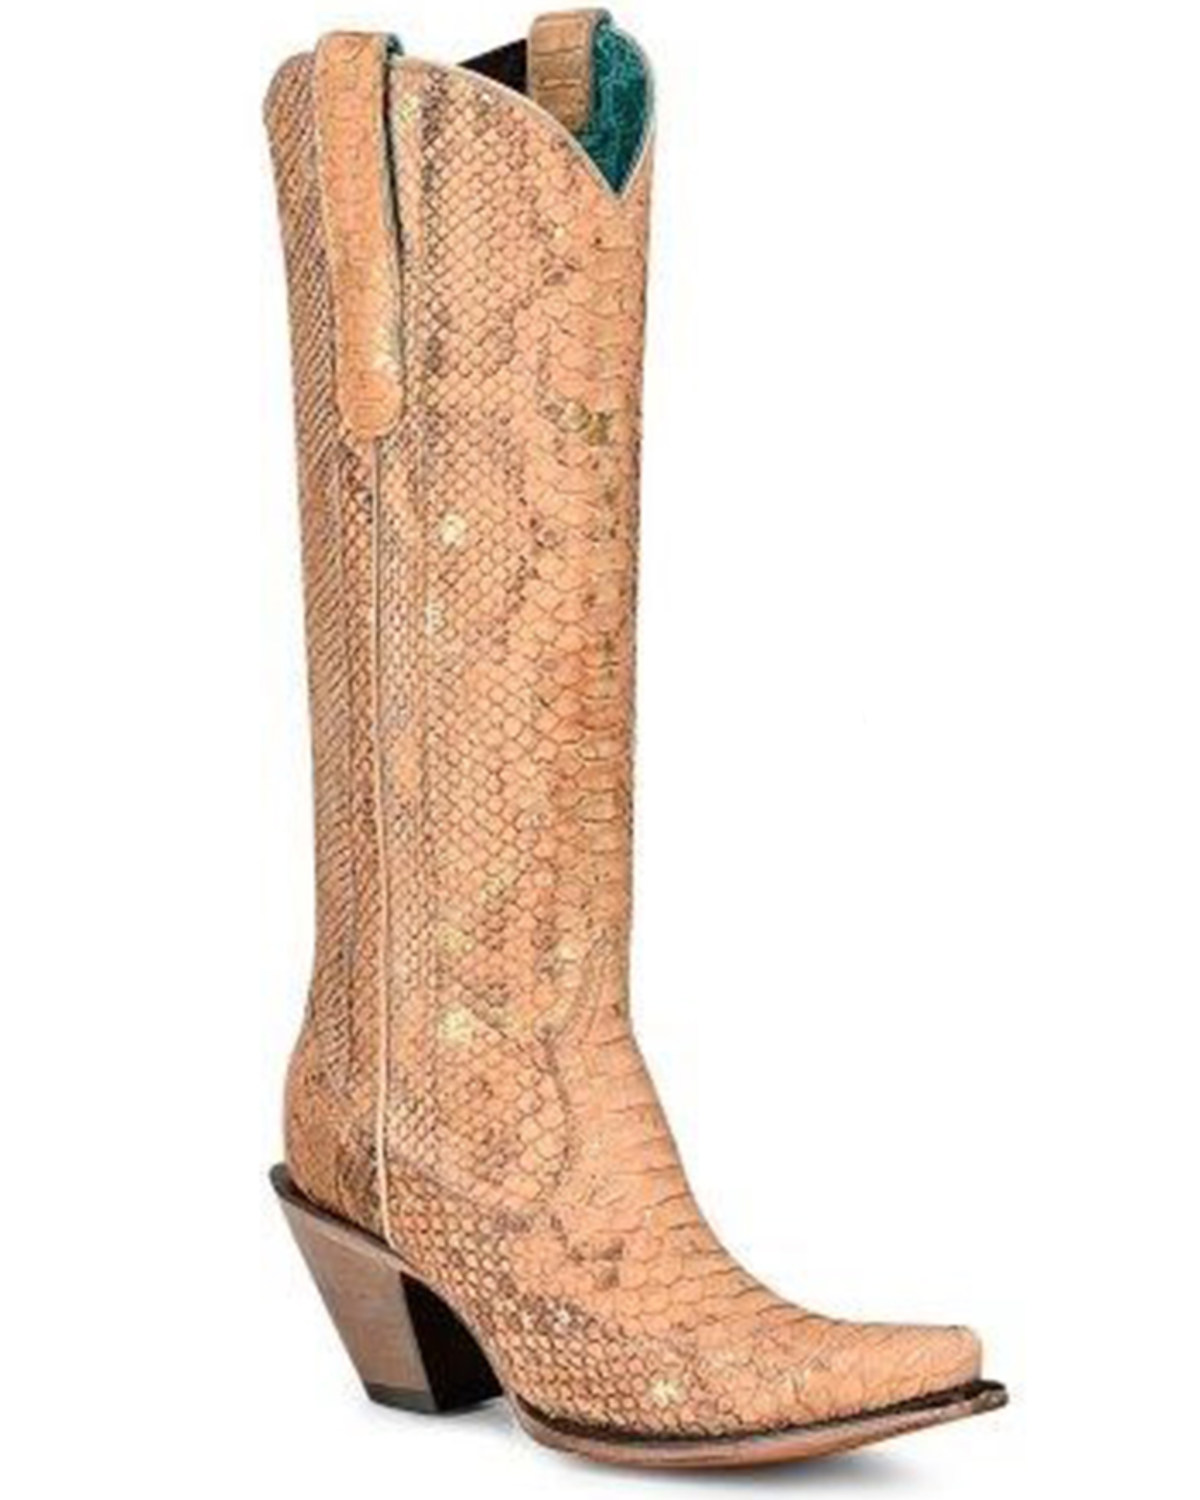 Corral Women's Full Exotic Python Tall Western Boots - Snip Toe